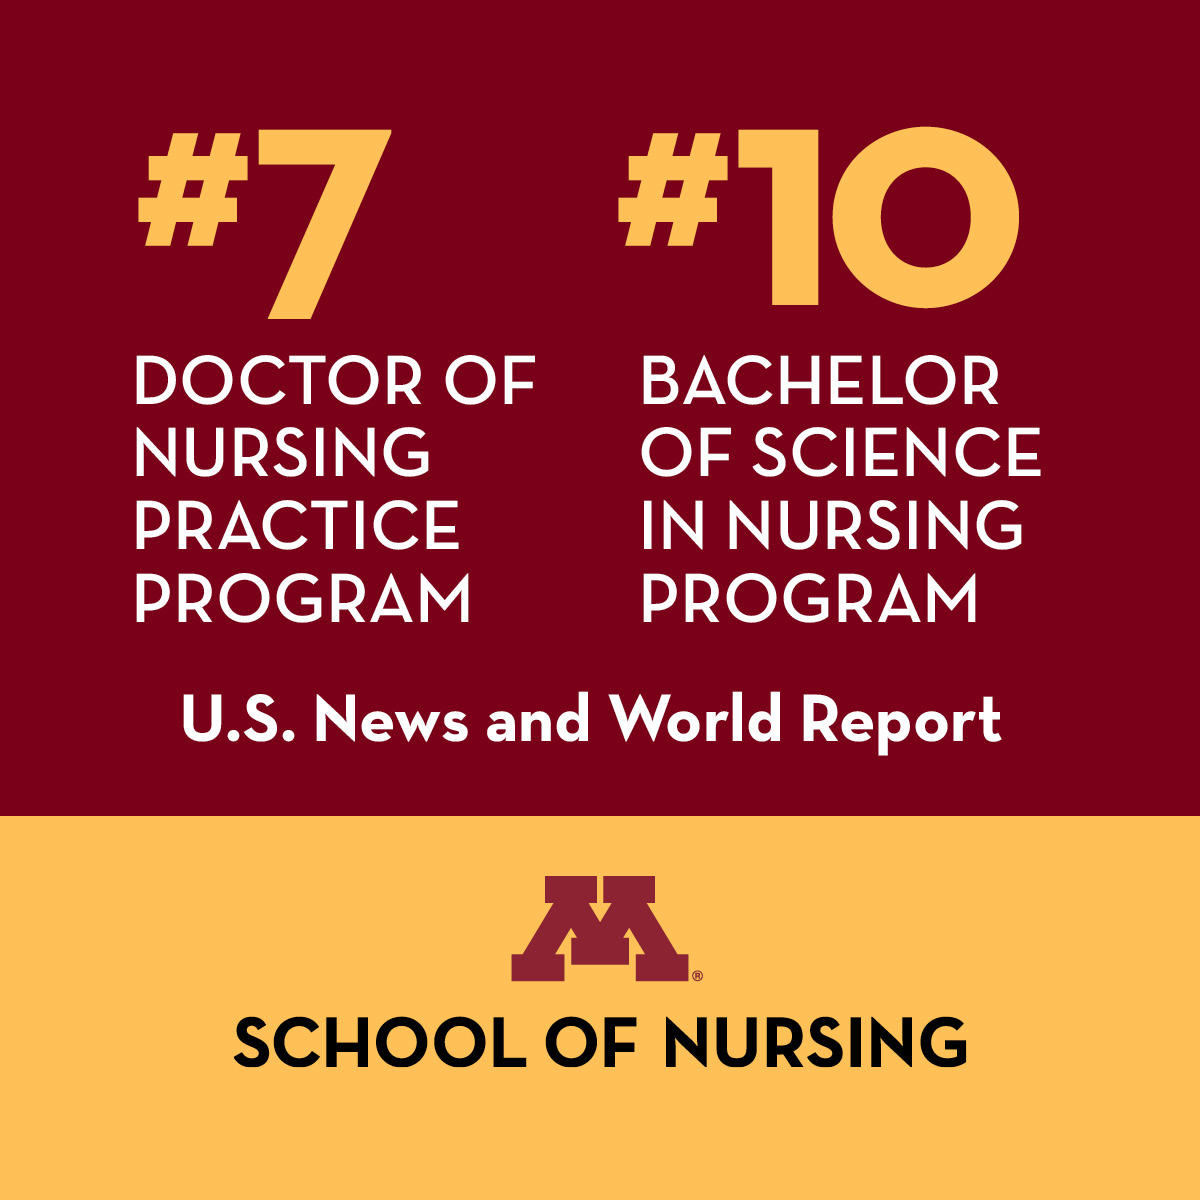 7th Doctor of Nursing Practice Program and 10th Bachelor of Science in Nursing Program per U.S. News and World report